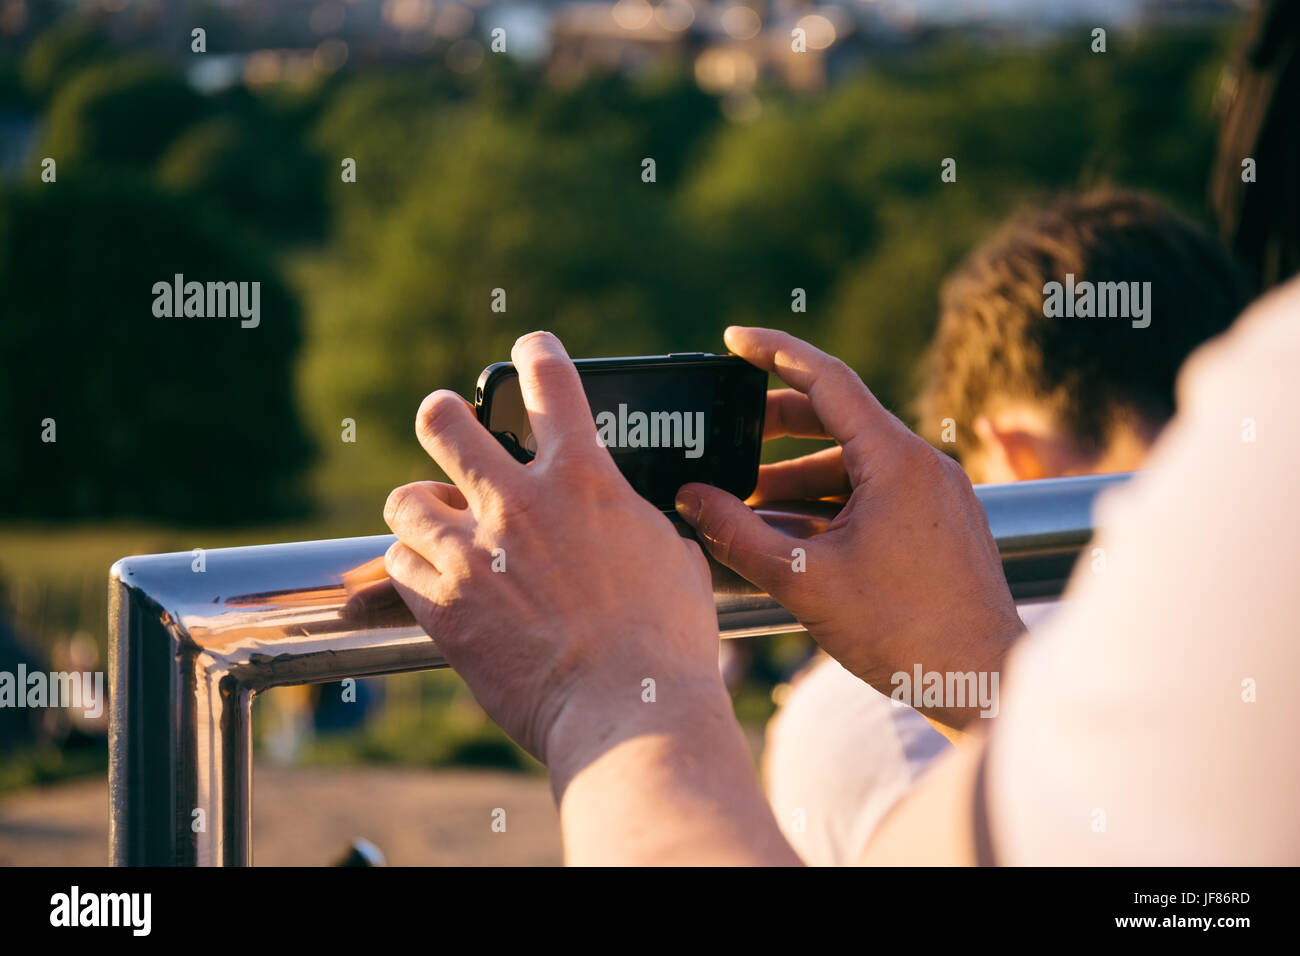 Man holding a smartphone in hands, leaning on metal railing, stabilising to take a picture on the phone. Stock Photo